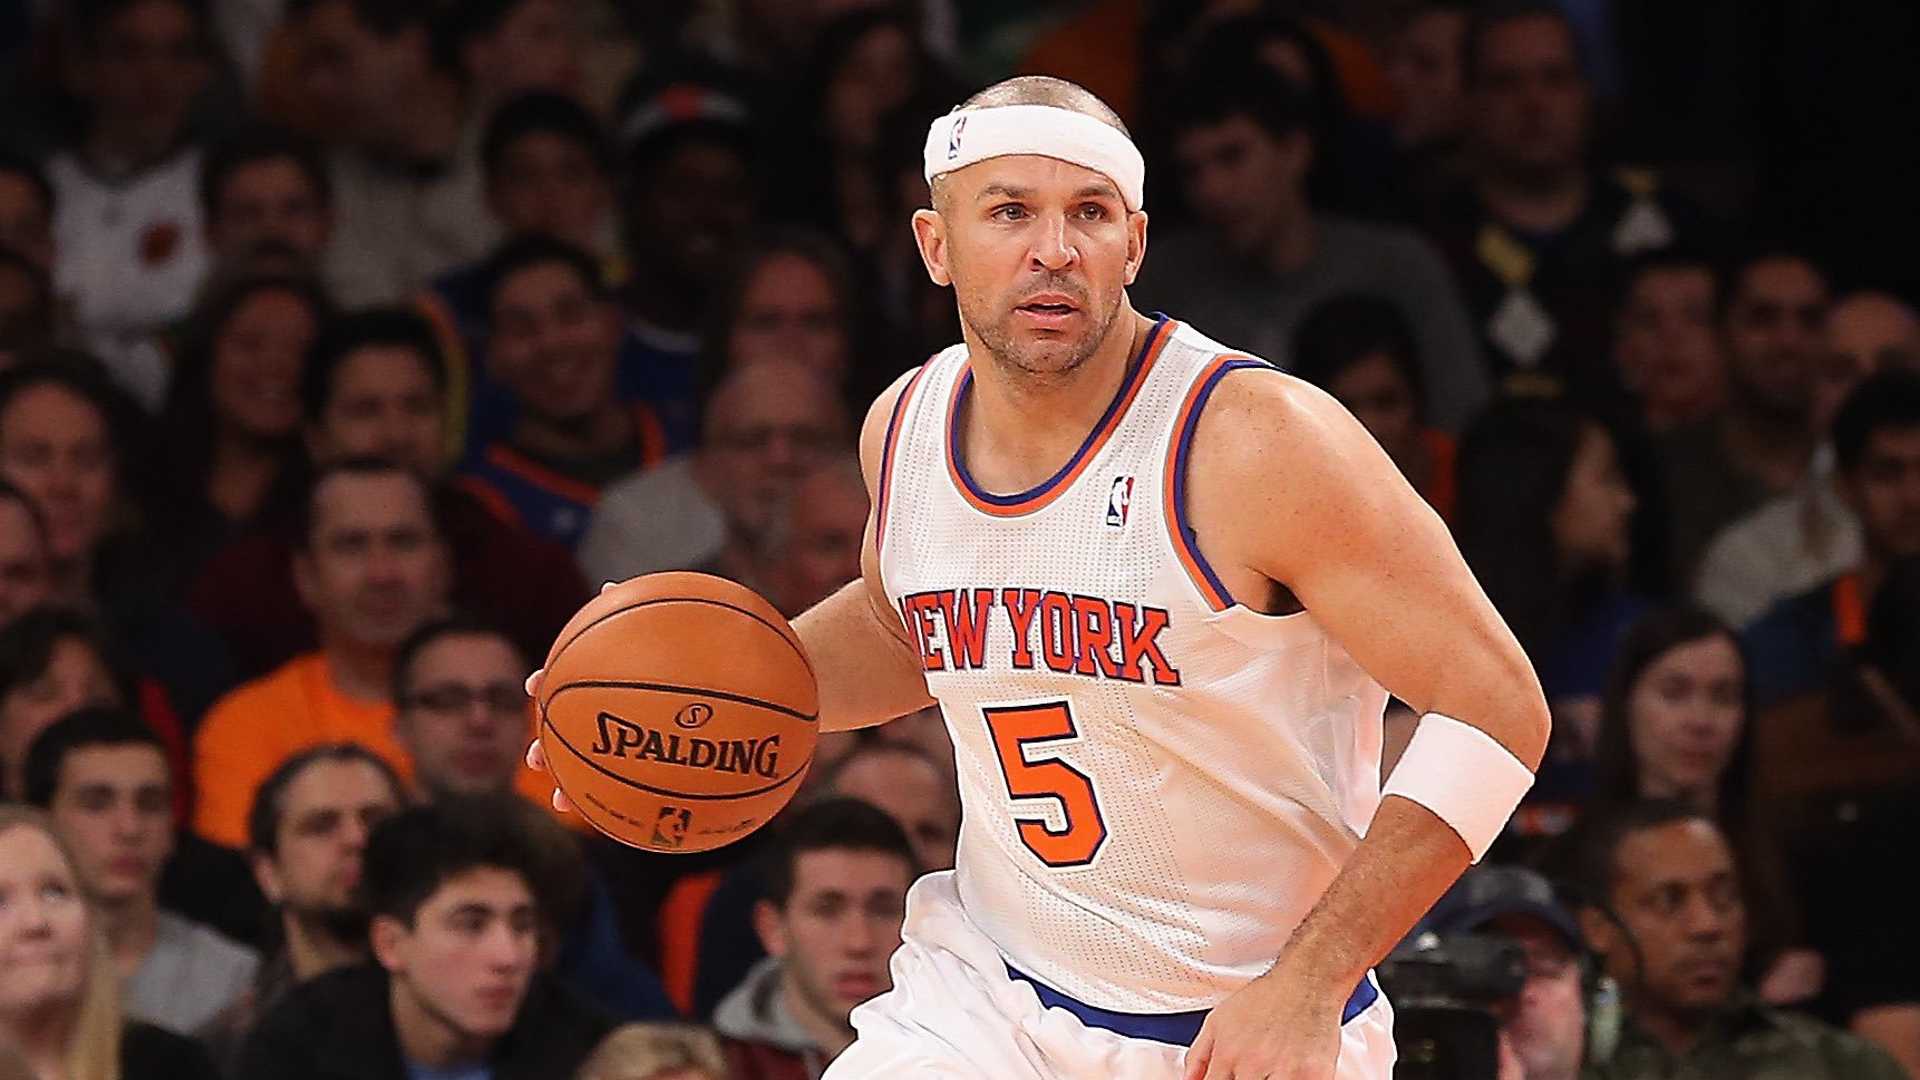 Jason Kidd has the second most steals in the NBA. (Image credits: twitter)